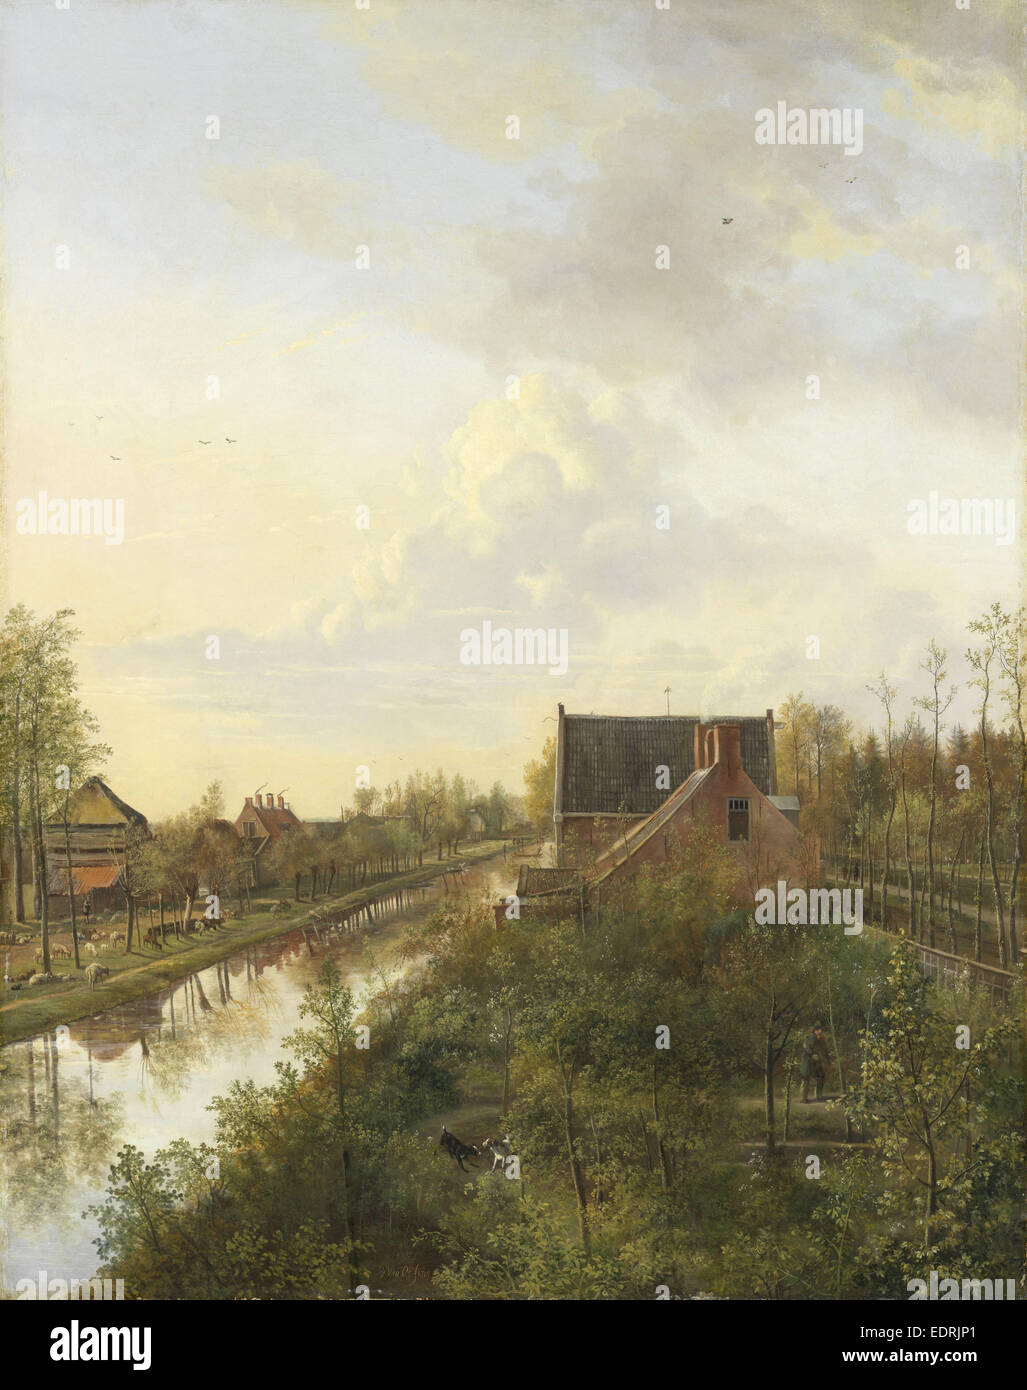 The Canal at ’s-Graveland, The Netherlands, Pieter Gerardus van Os, 1818 Stock Photo